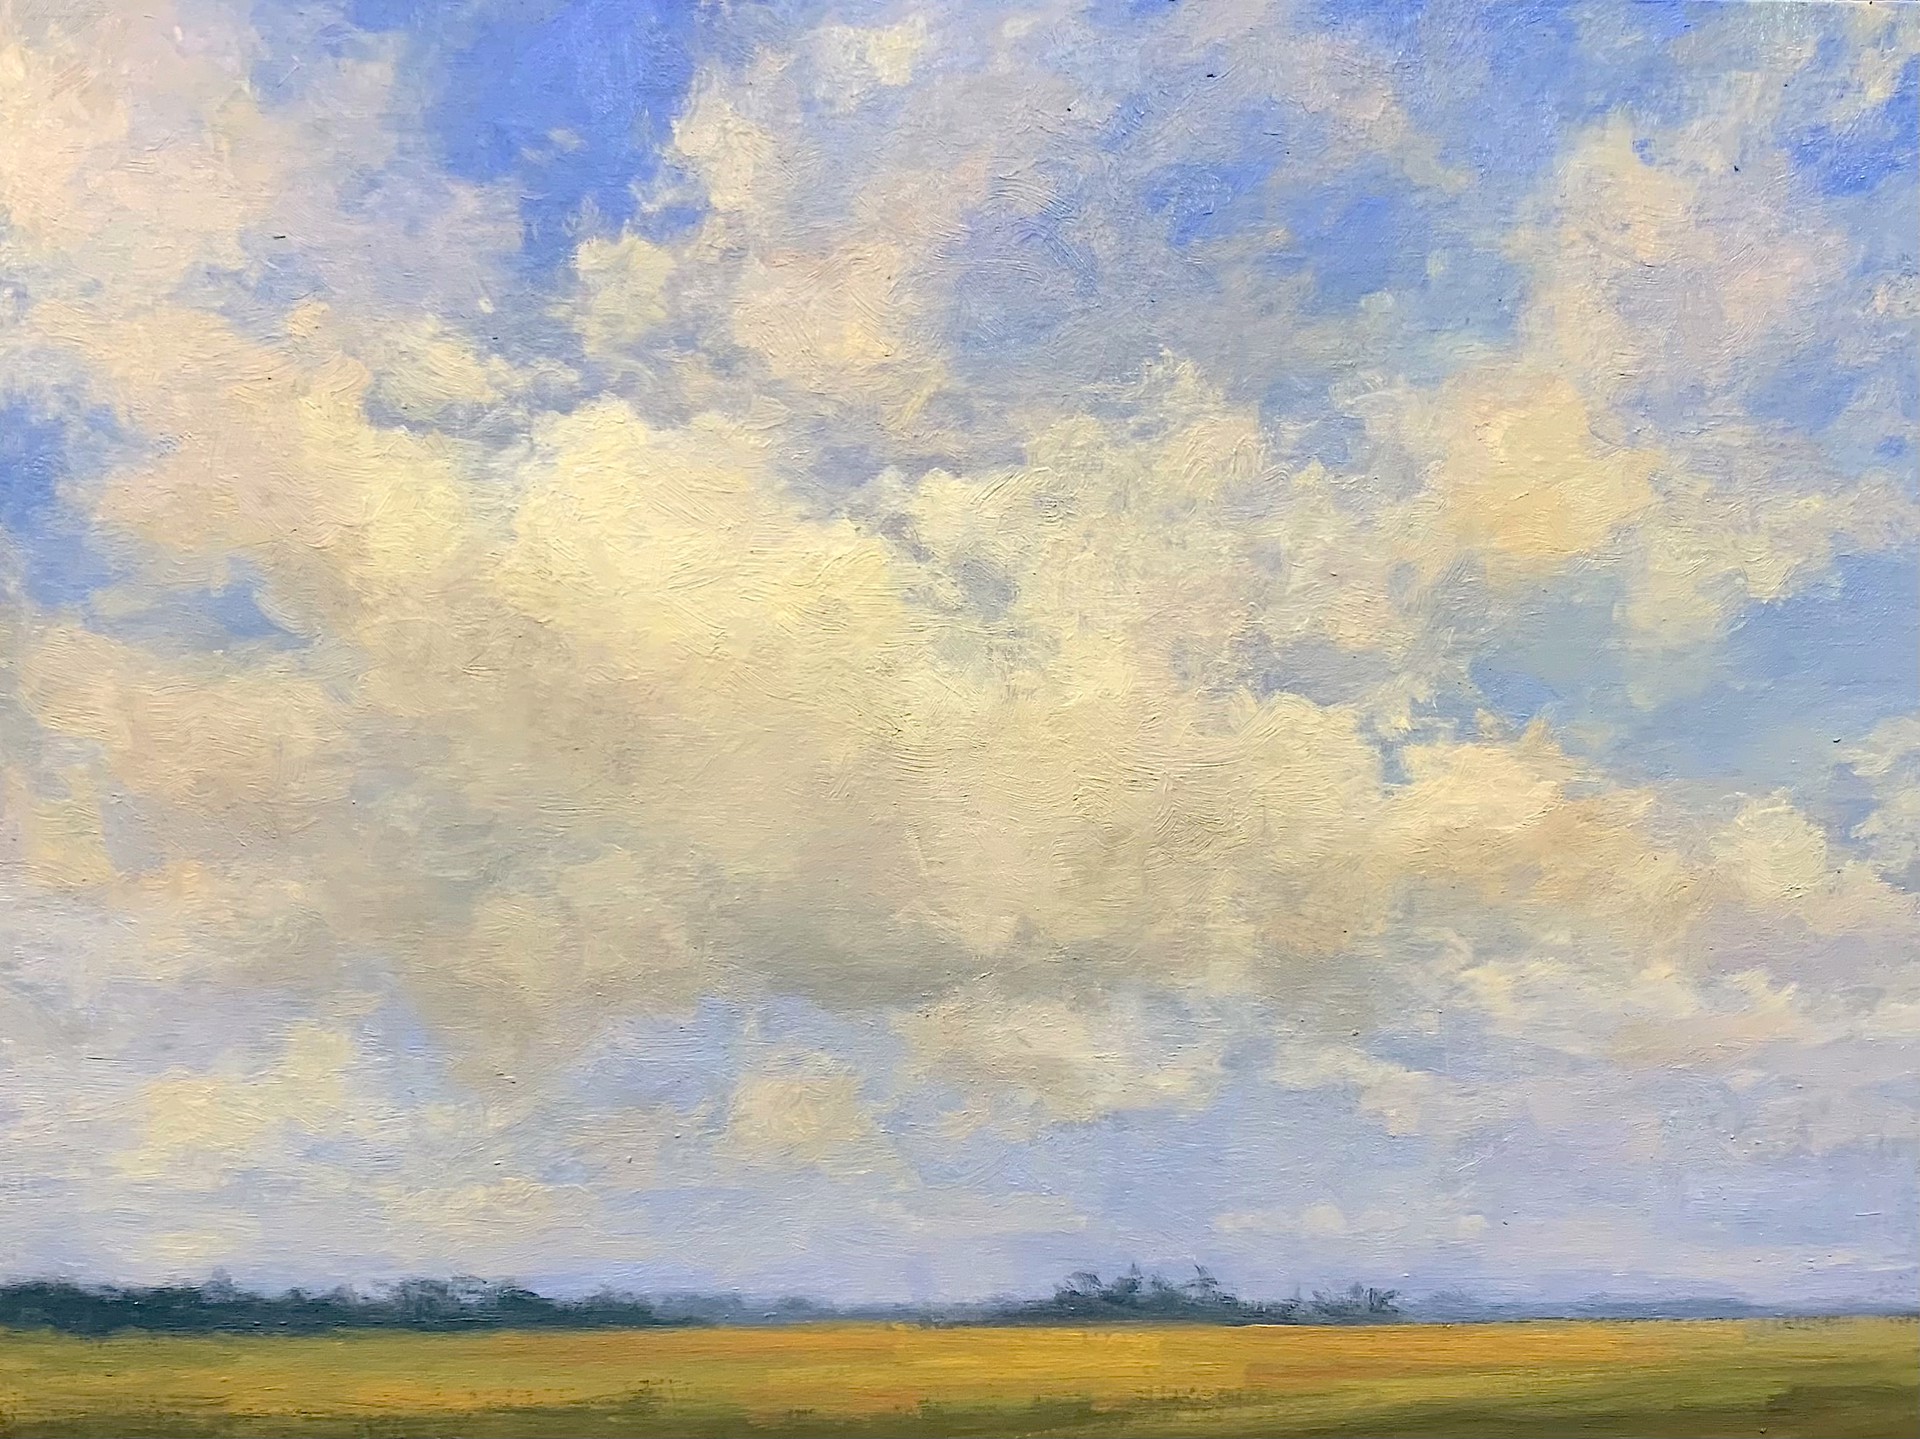 A Sky Filled with Buttercup Clouds by Dottie T. Leatherwood